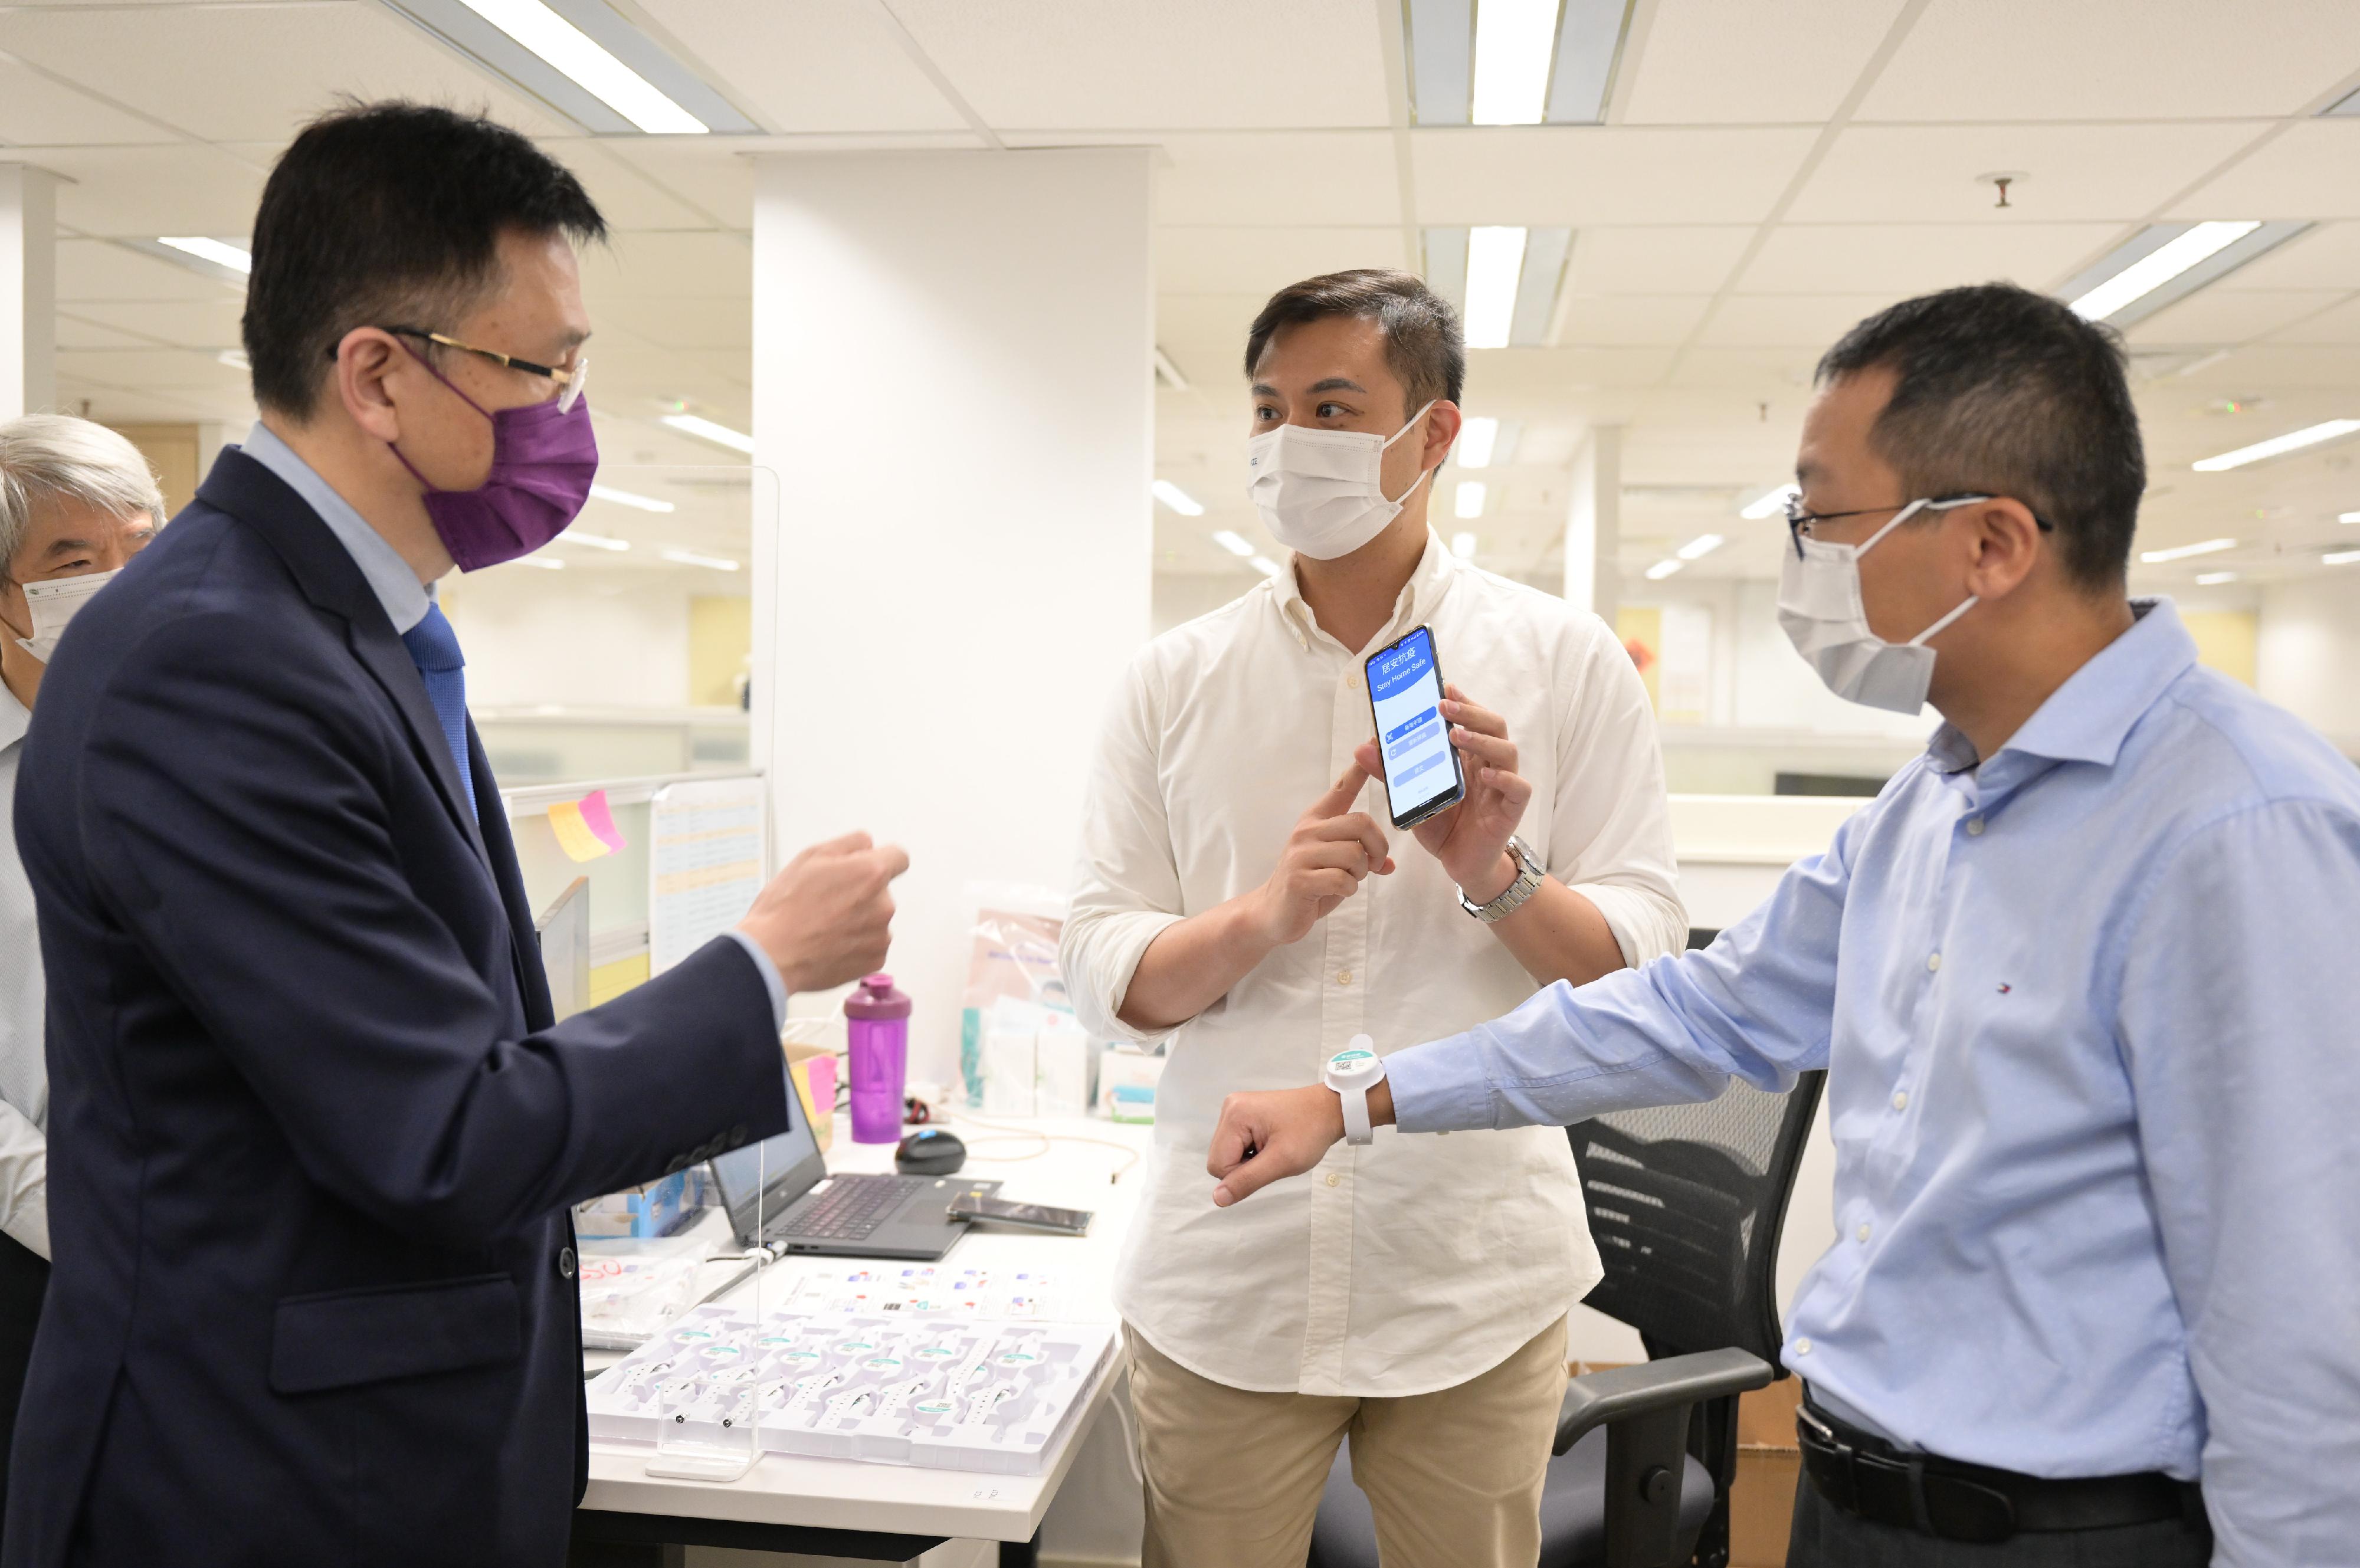 The Secretary for Innovation, Technology and Industry, Professor Sun Dong (left), visits the Compulsory Quarantine Support Centre set up by the Office of the Government Chief Information Officer (OGCIO) in Wong Chuk Hang today (August 12) to learn about how the OGCIO has used electronic wristbands pairing with the "StayHomeSafe" mobile application to help monitor persons under home isolation to ensure that they stay in the designated premises during the isolation period.